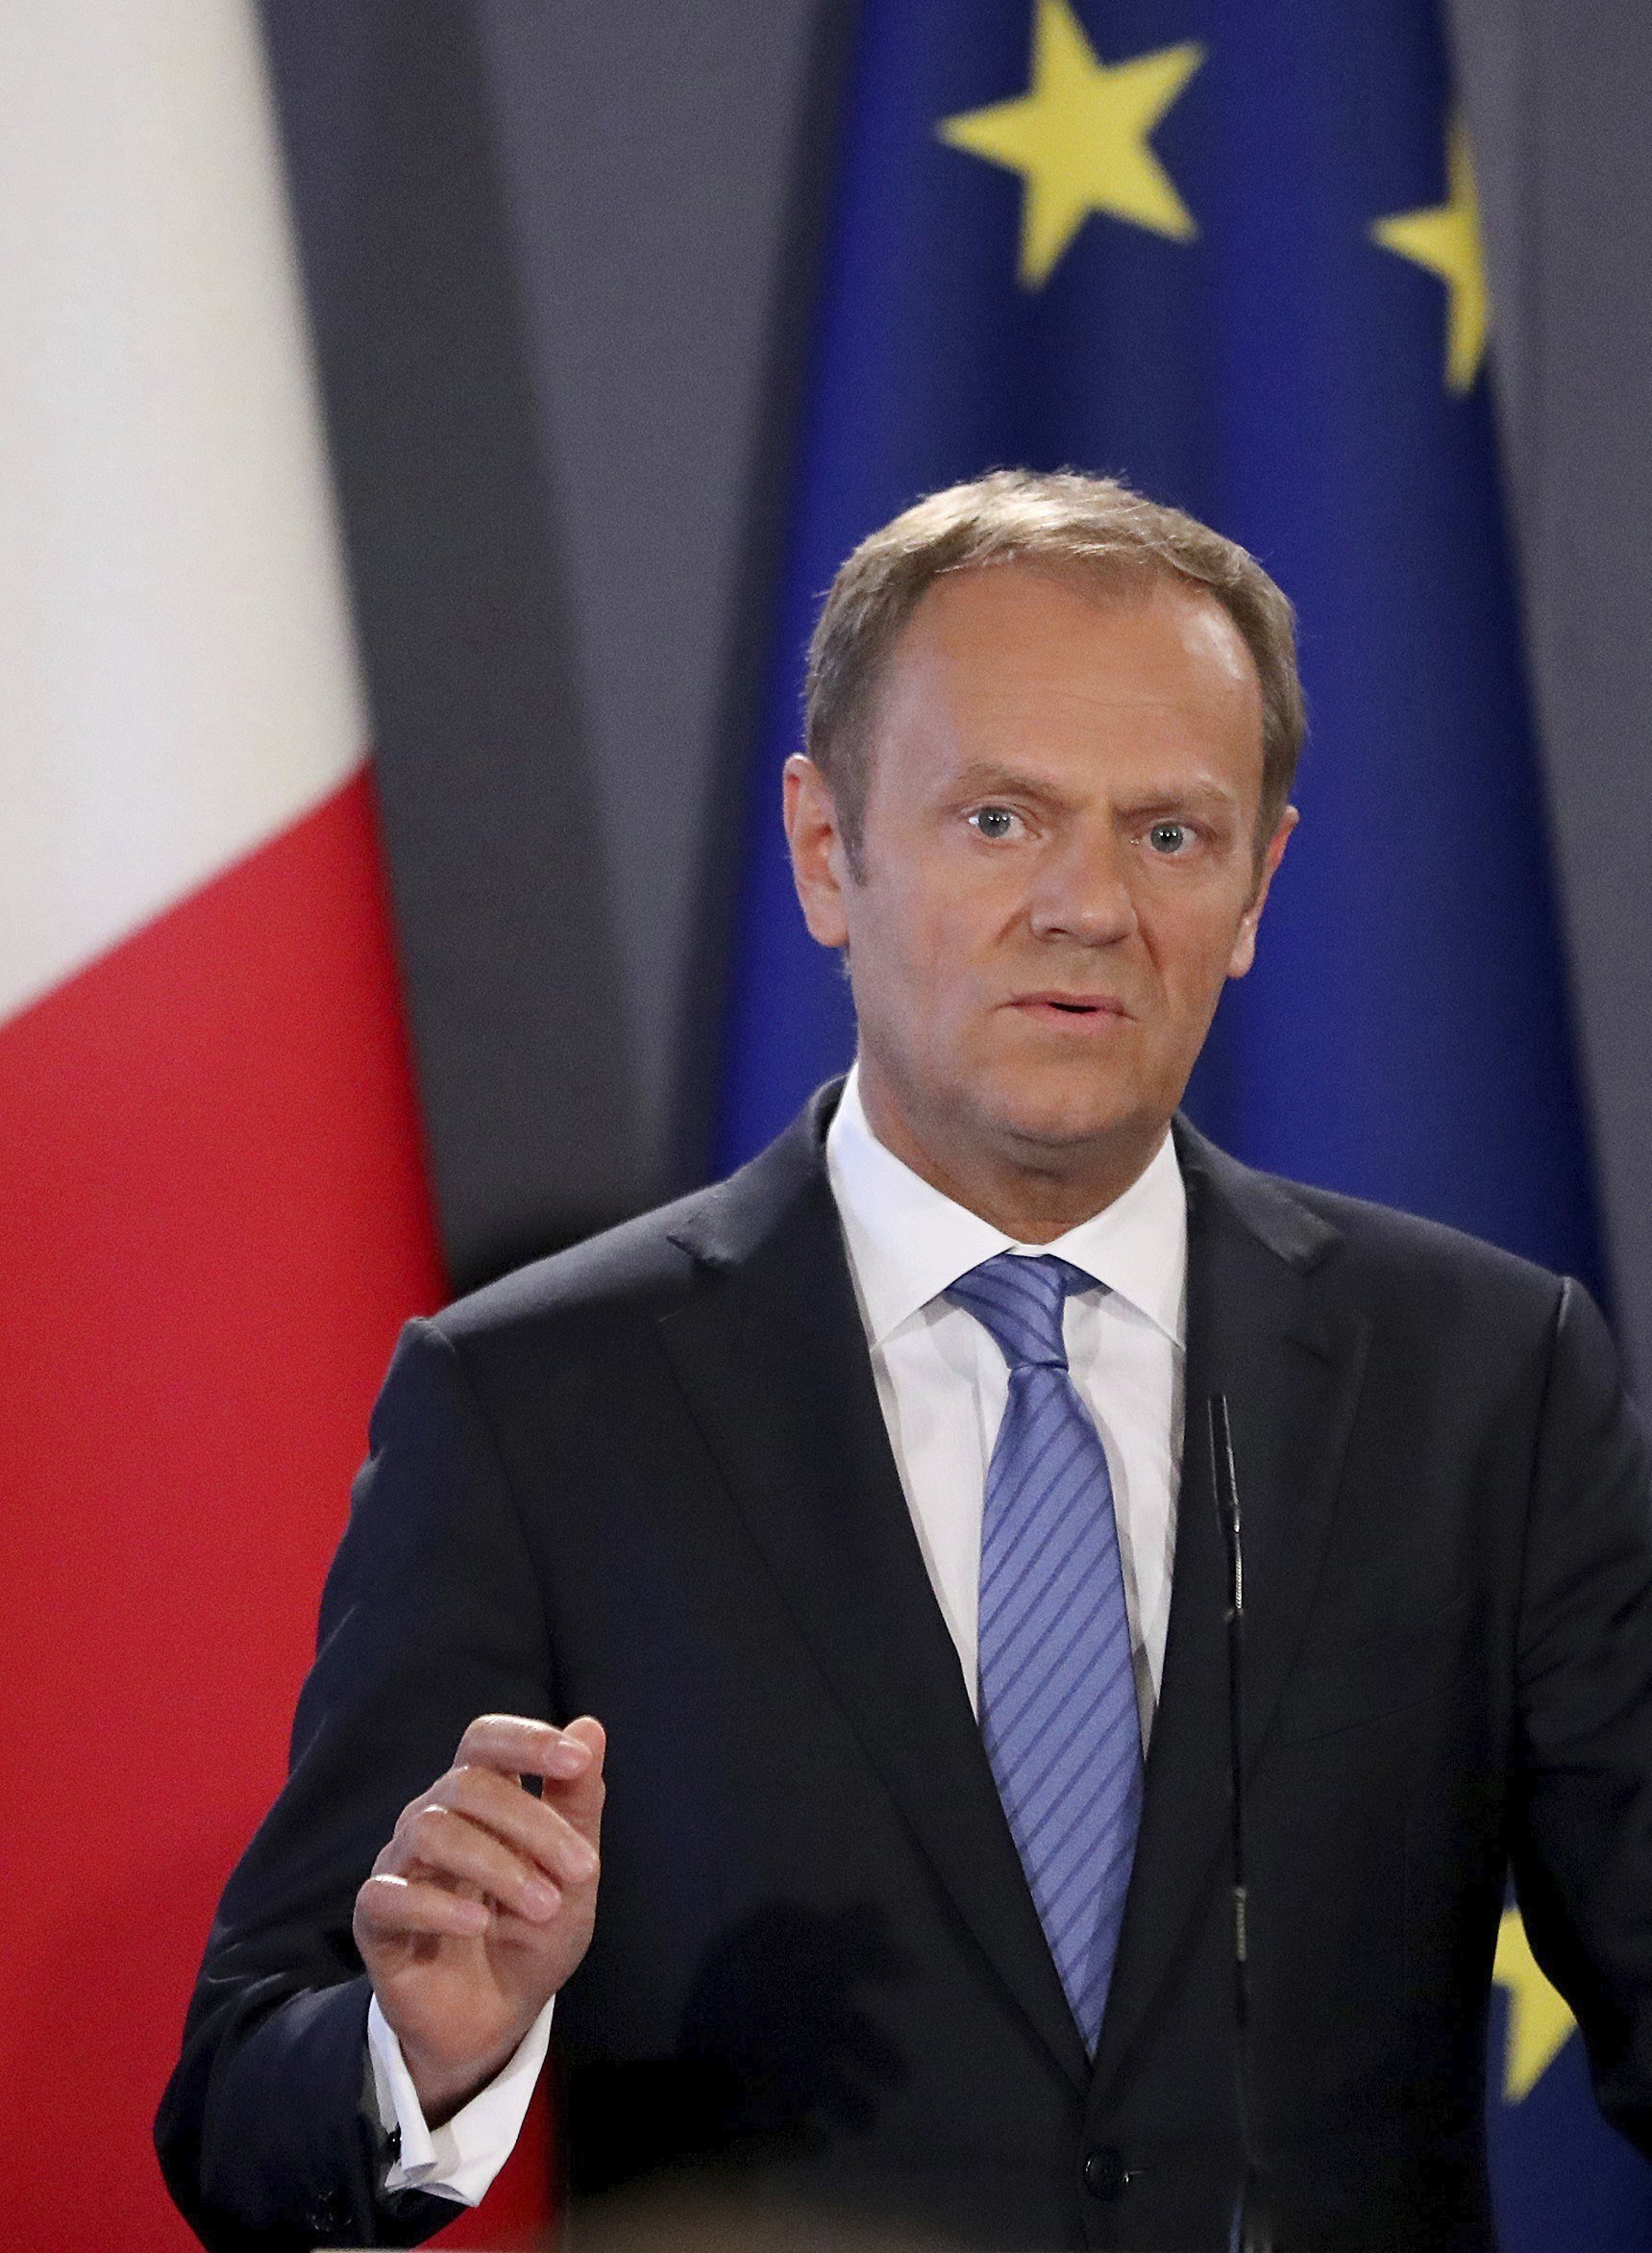 Donald Tusk hopes Spain doesn't use force against Catalonia